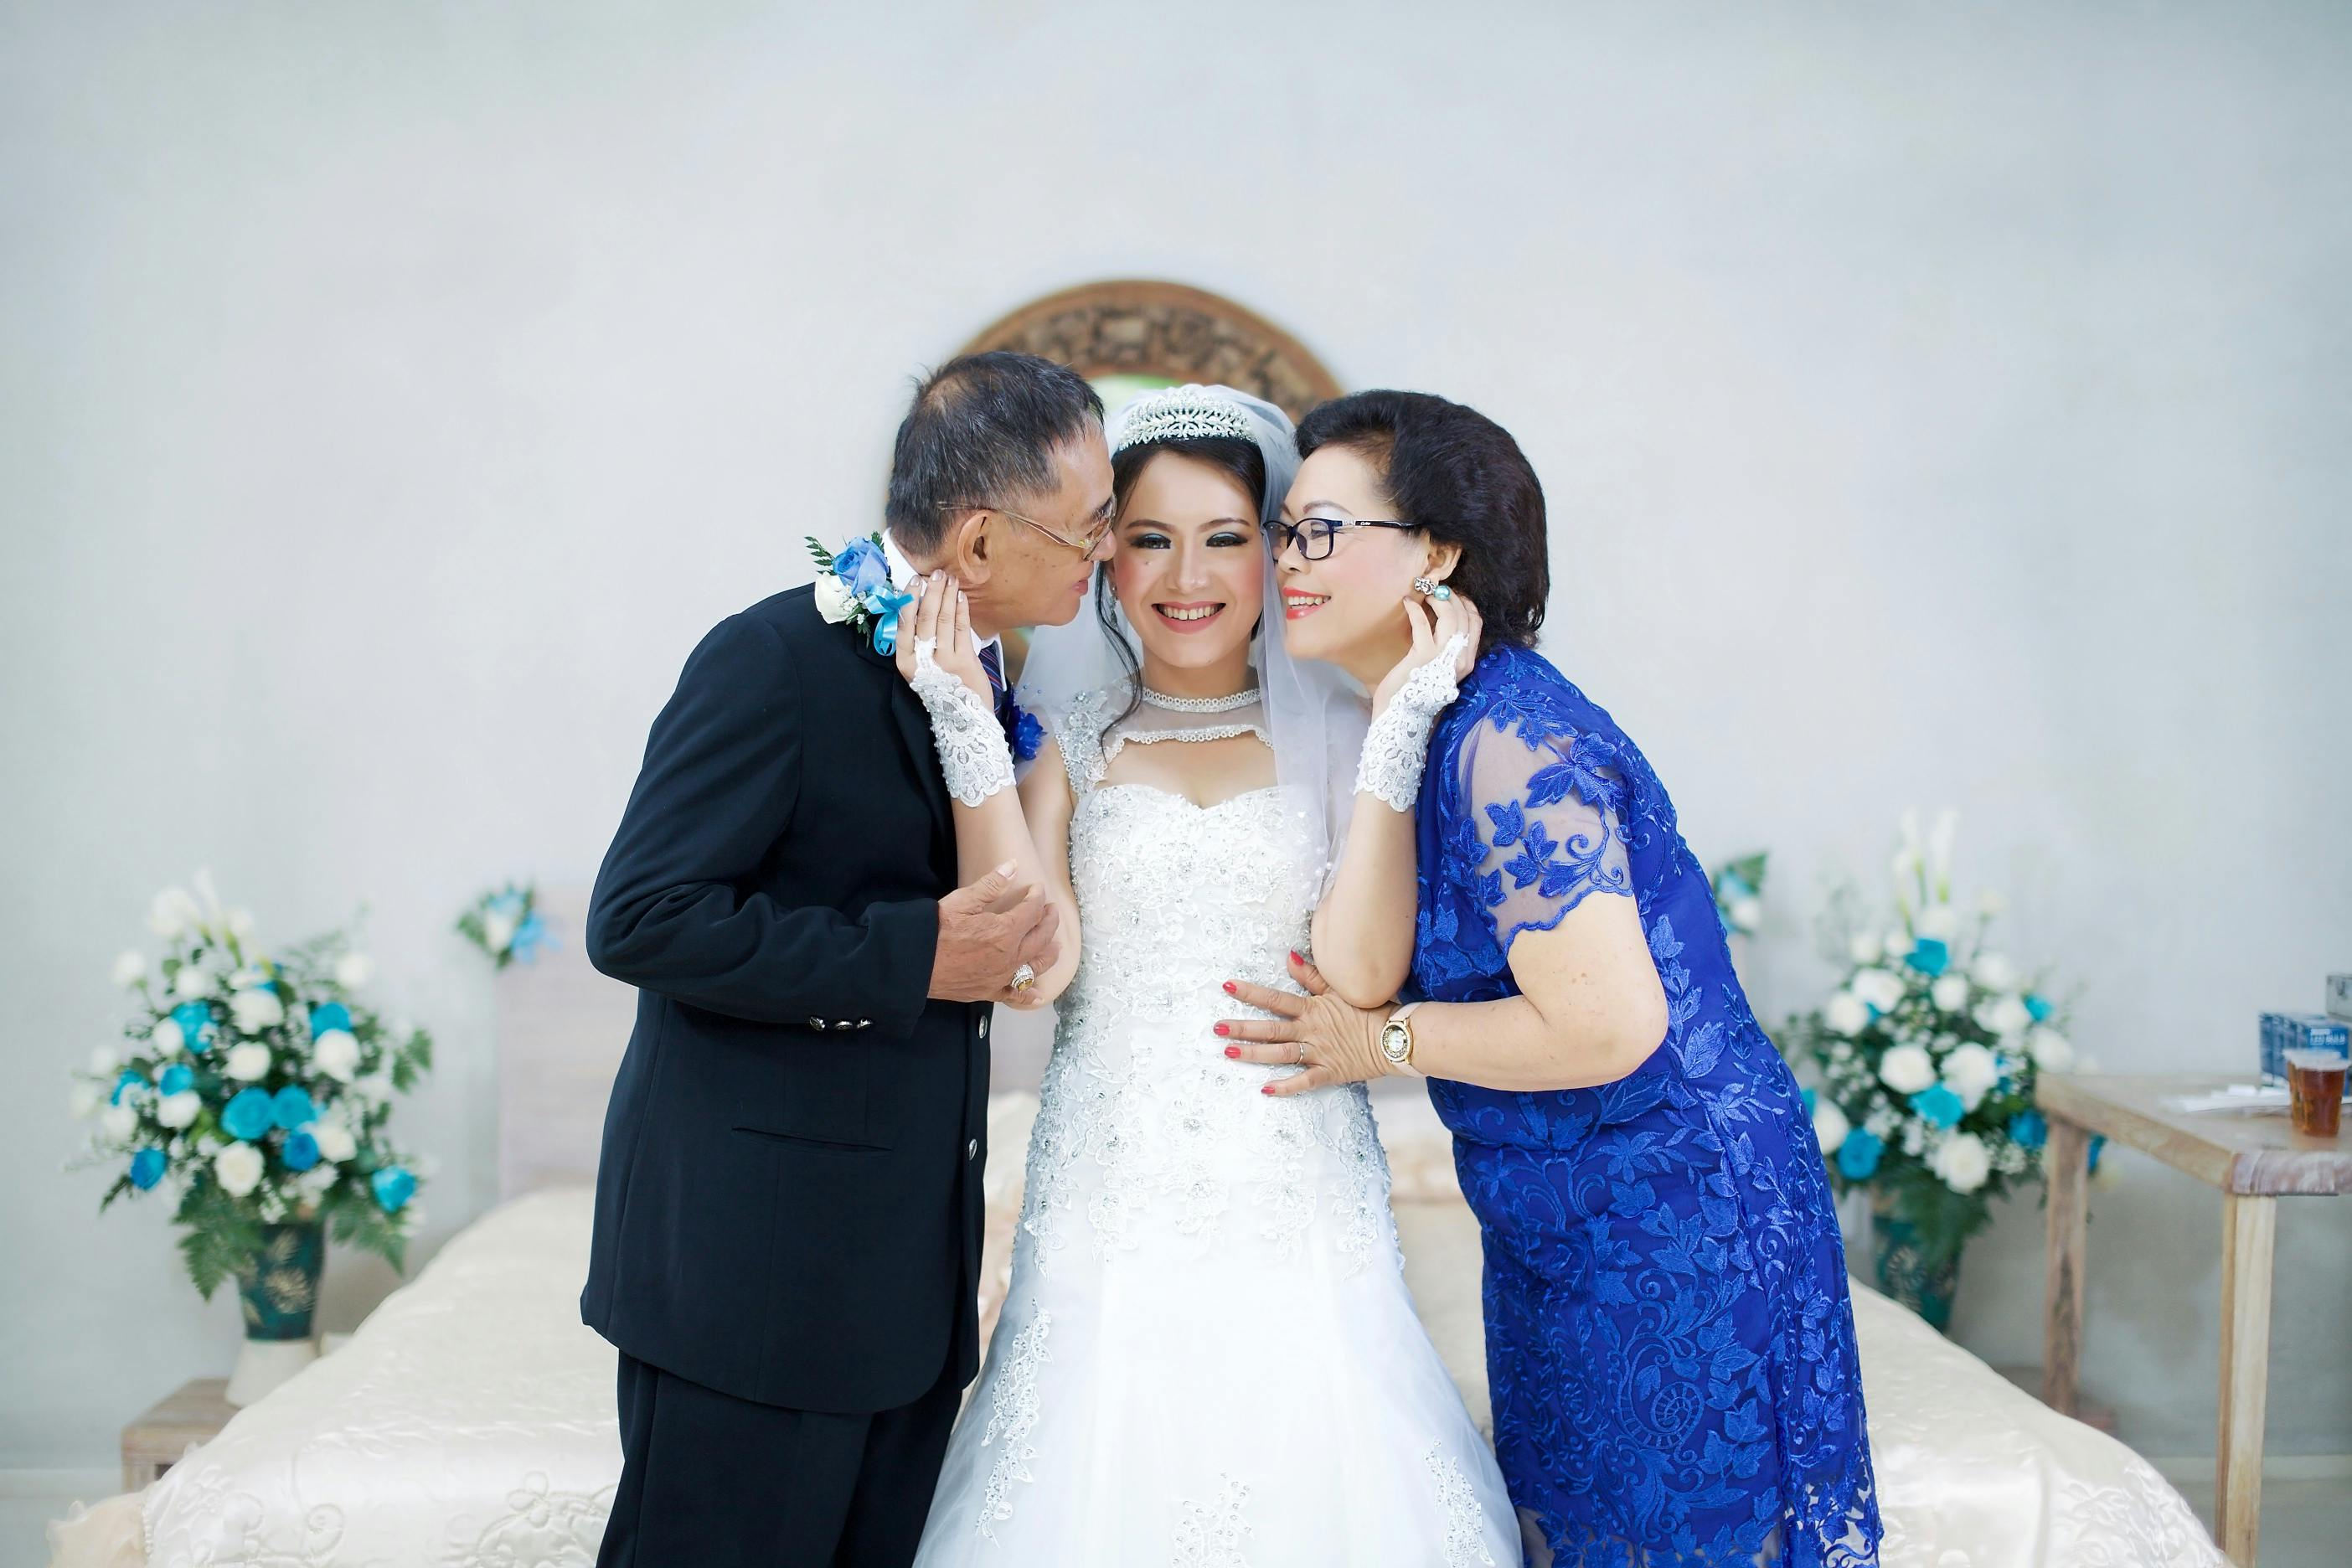 A happy bride posing with her parents on her wedding day | Source: Pexels